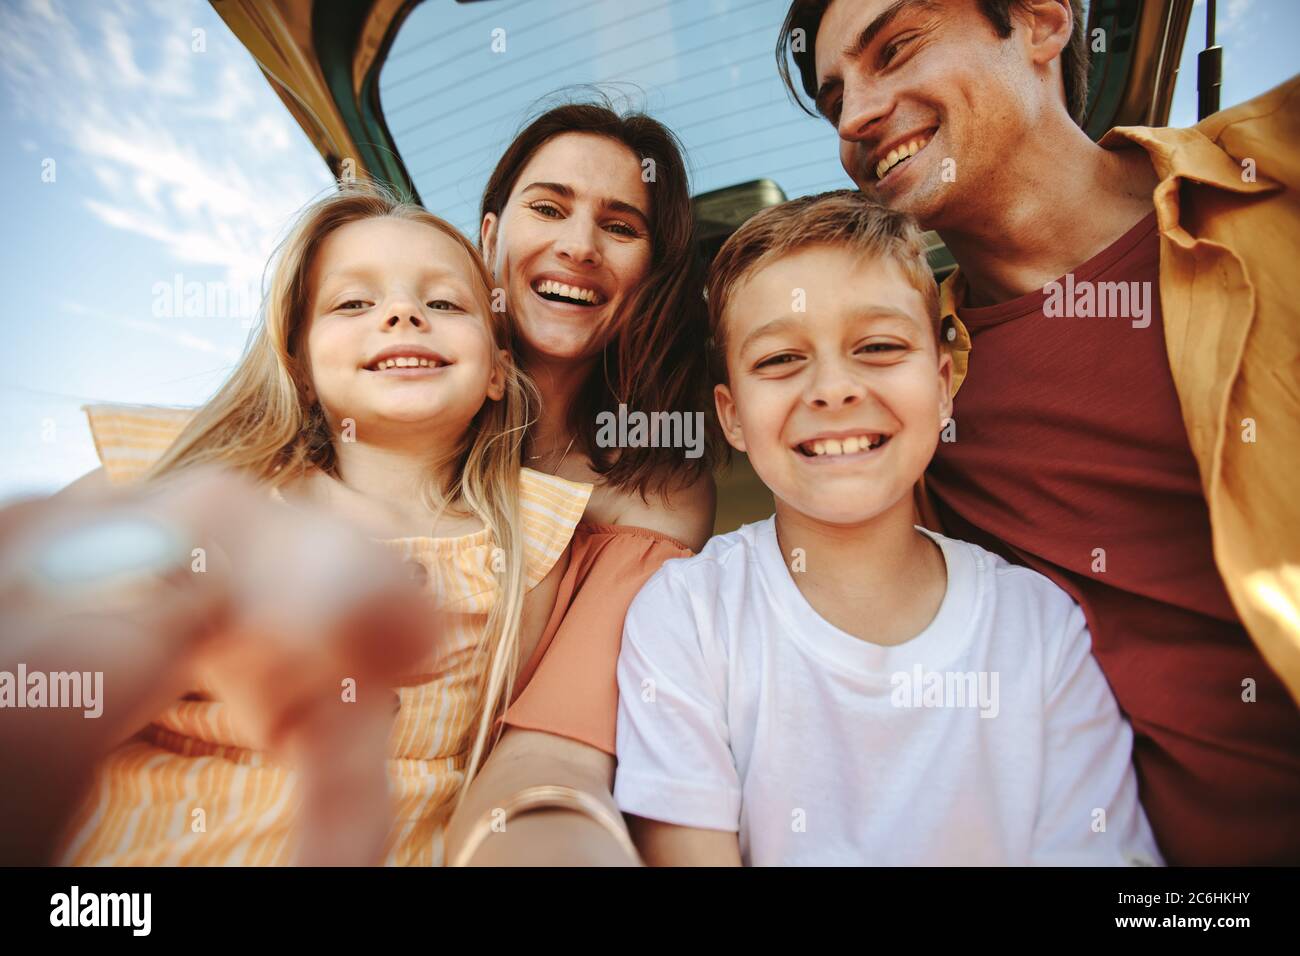 Taking a selfie from cellphone perspective. Happy family looking at camera taking a photo during vacation. Stock Photo